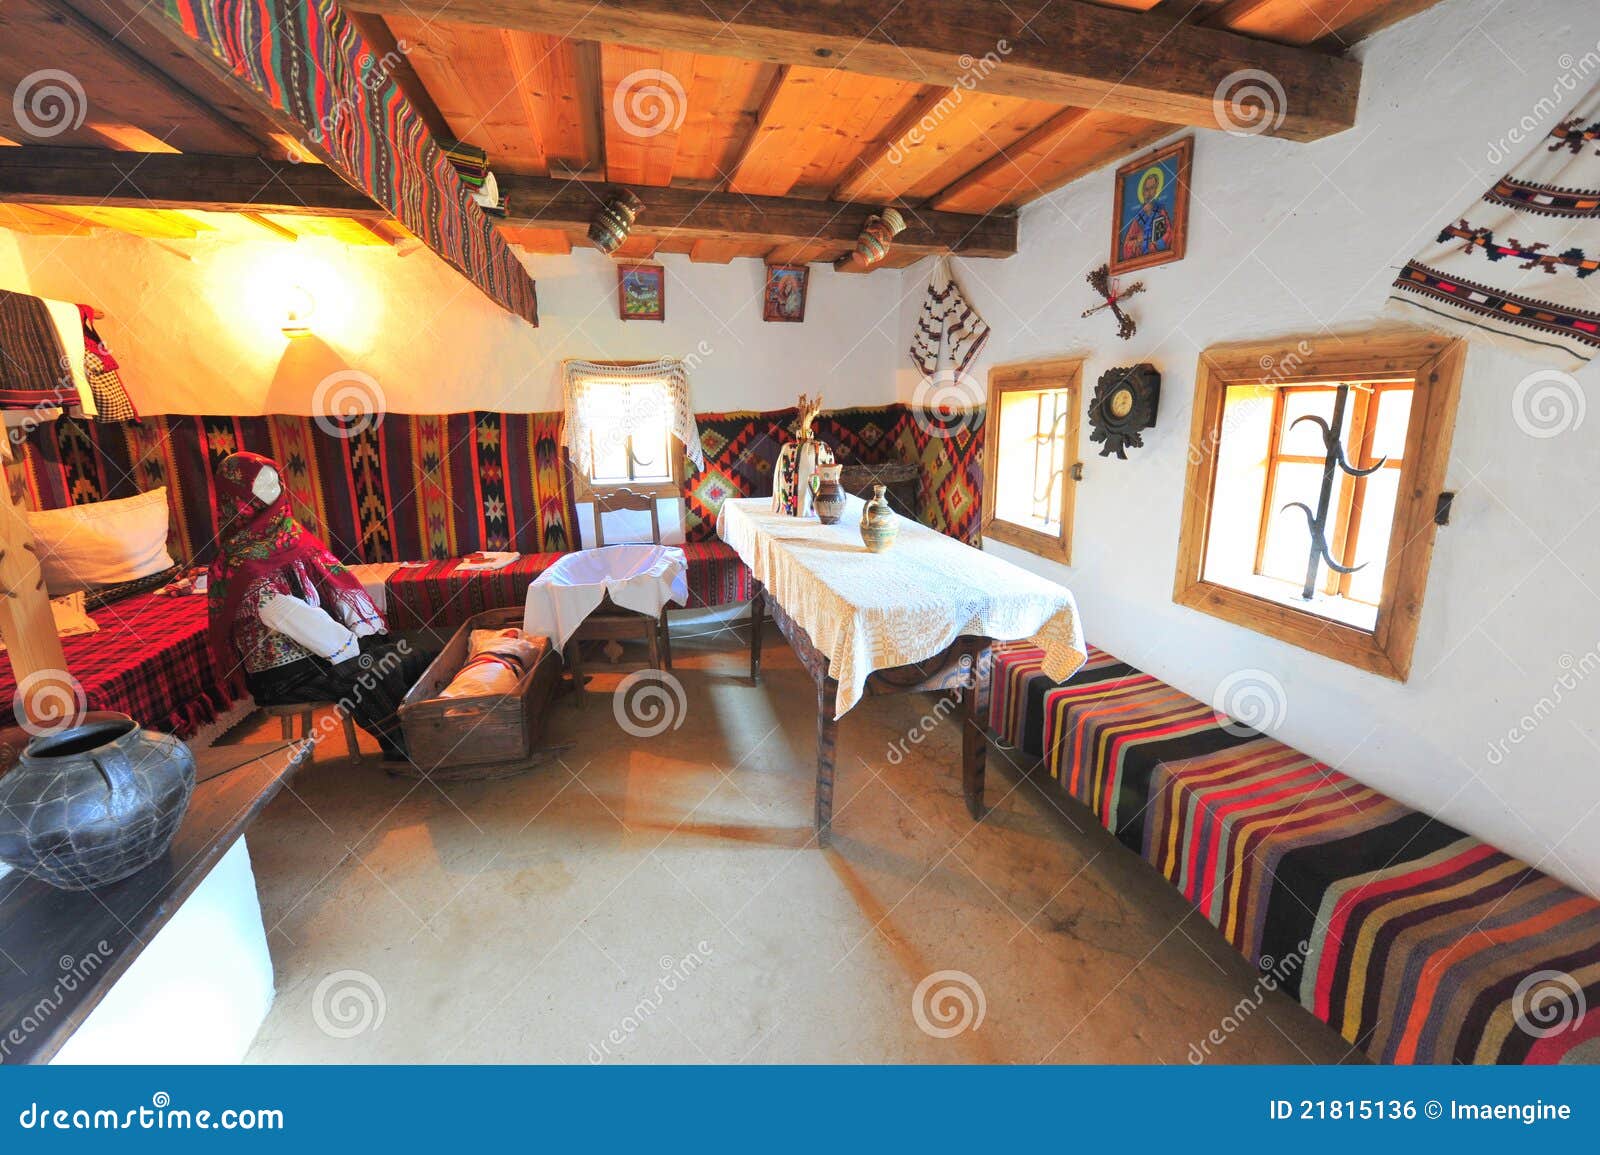 traditional rural home interior from bucovina